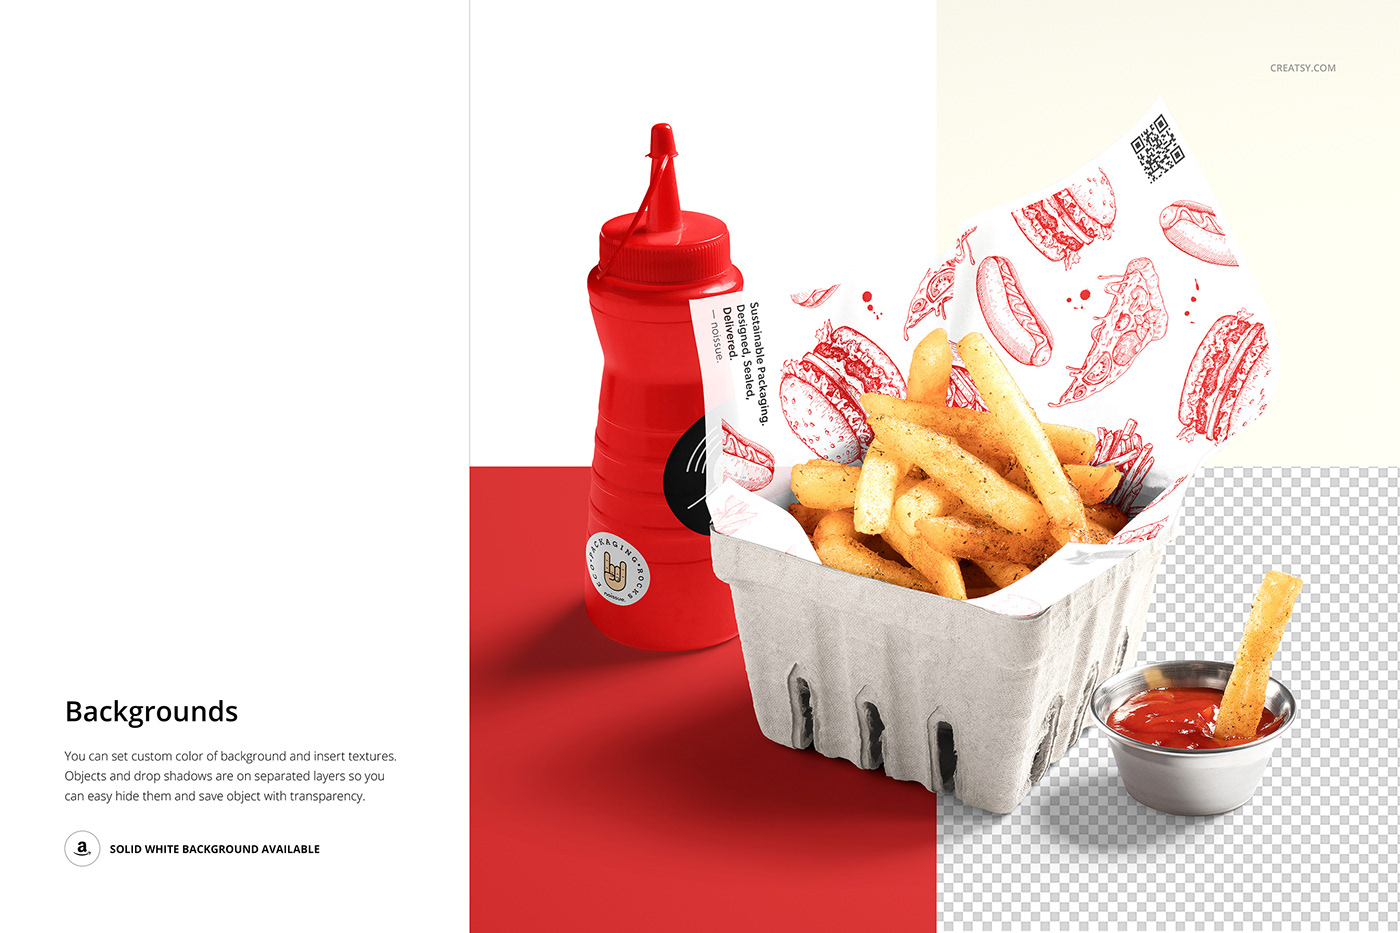 Food  French Fries mock-up Mockup mockups paper template wrapping creatsy